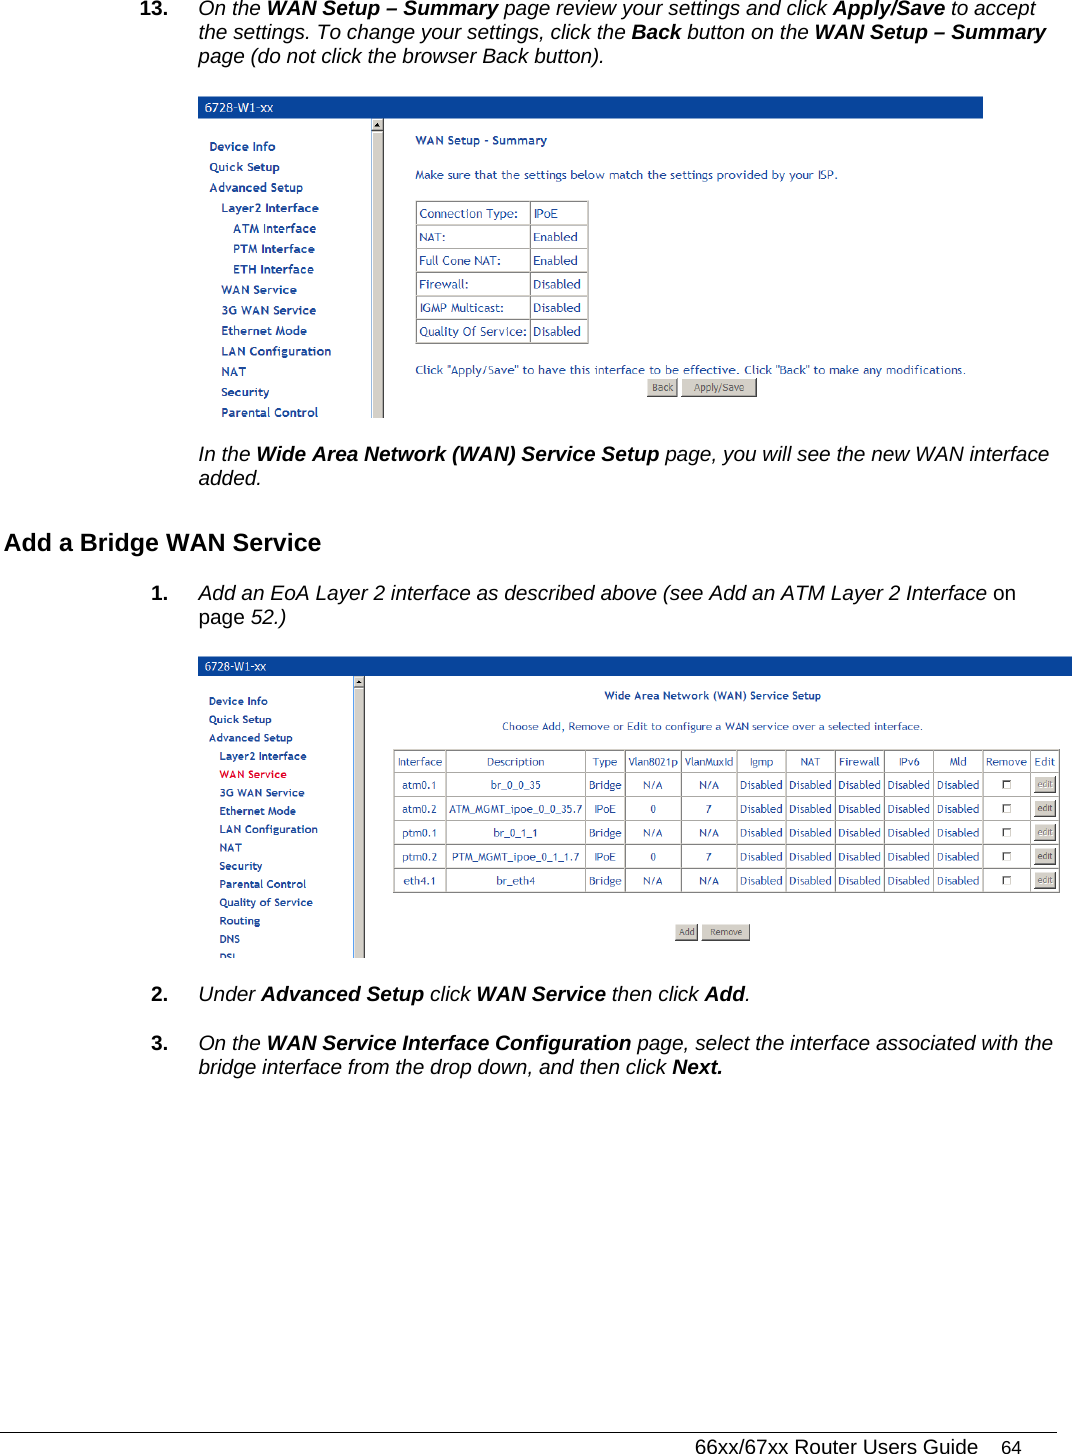   66xx/67xx Router Users Guide 64 13.  On the WAN Setup – Summary page review your settings and click Apply/Save to accept the settings. To change your settings, click the Back button on the WAN Setup – Summary page (do not click the browser Back button).   In the Wide Area Network (WAN) Service Setup page, you will see the new WAN interface added. Add a Bridge WAN Service 1.  Add an EoA Layer 2 interface as described above (see Add an ATM Layer 2 Interface on page 52.)  2.  Under Advanced Setup click WAN Service then click Add. 3.  On the WAN Service Interface Configuration page, select the interface associated with the bridge interface from the drop down, and then click Next. 